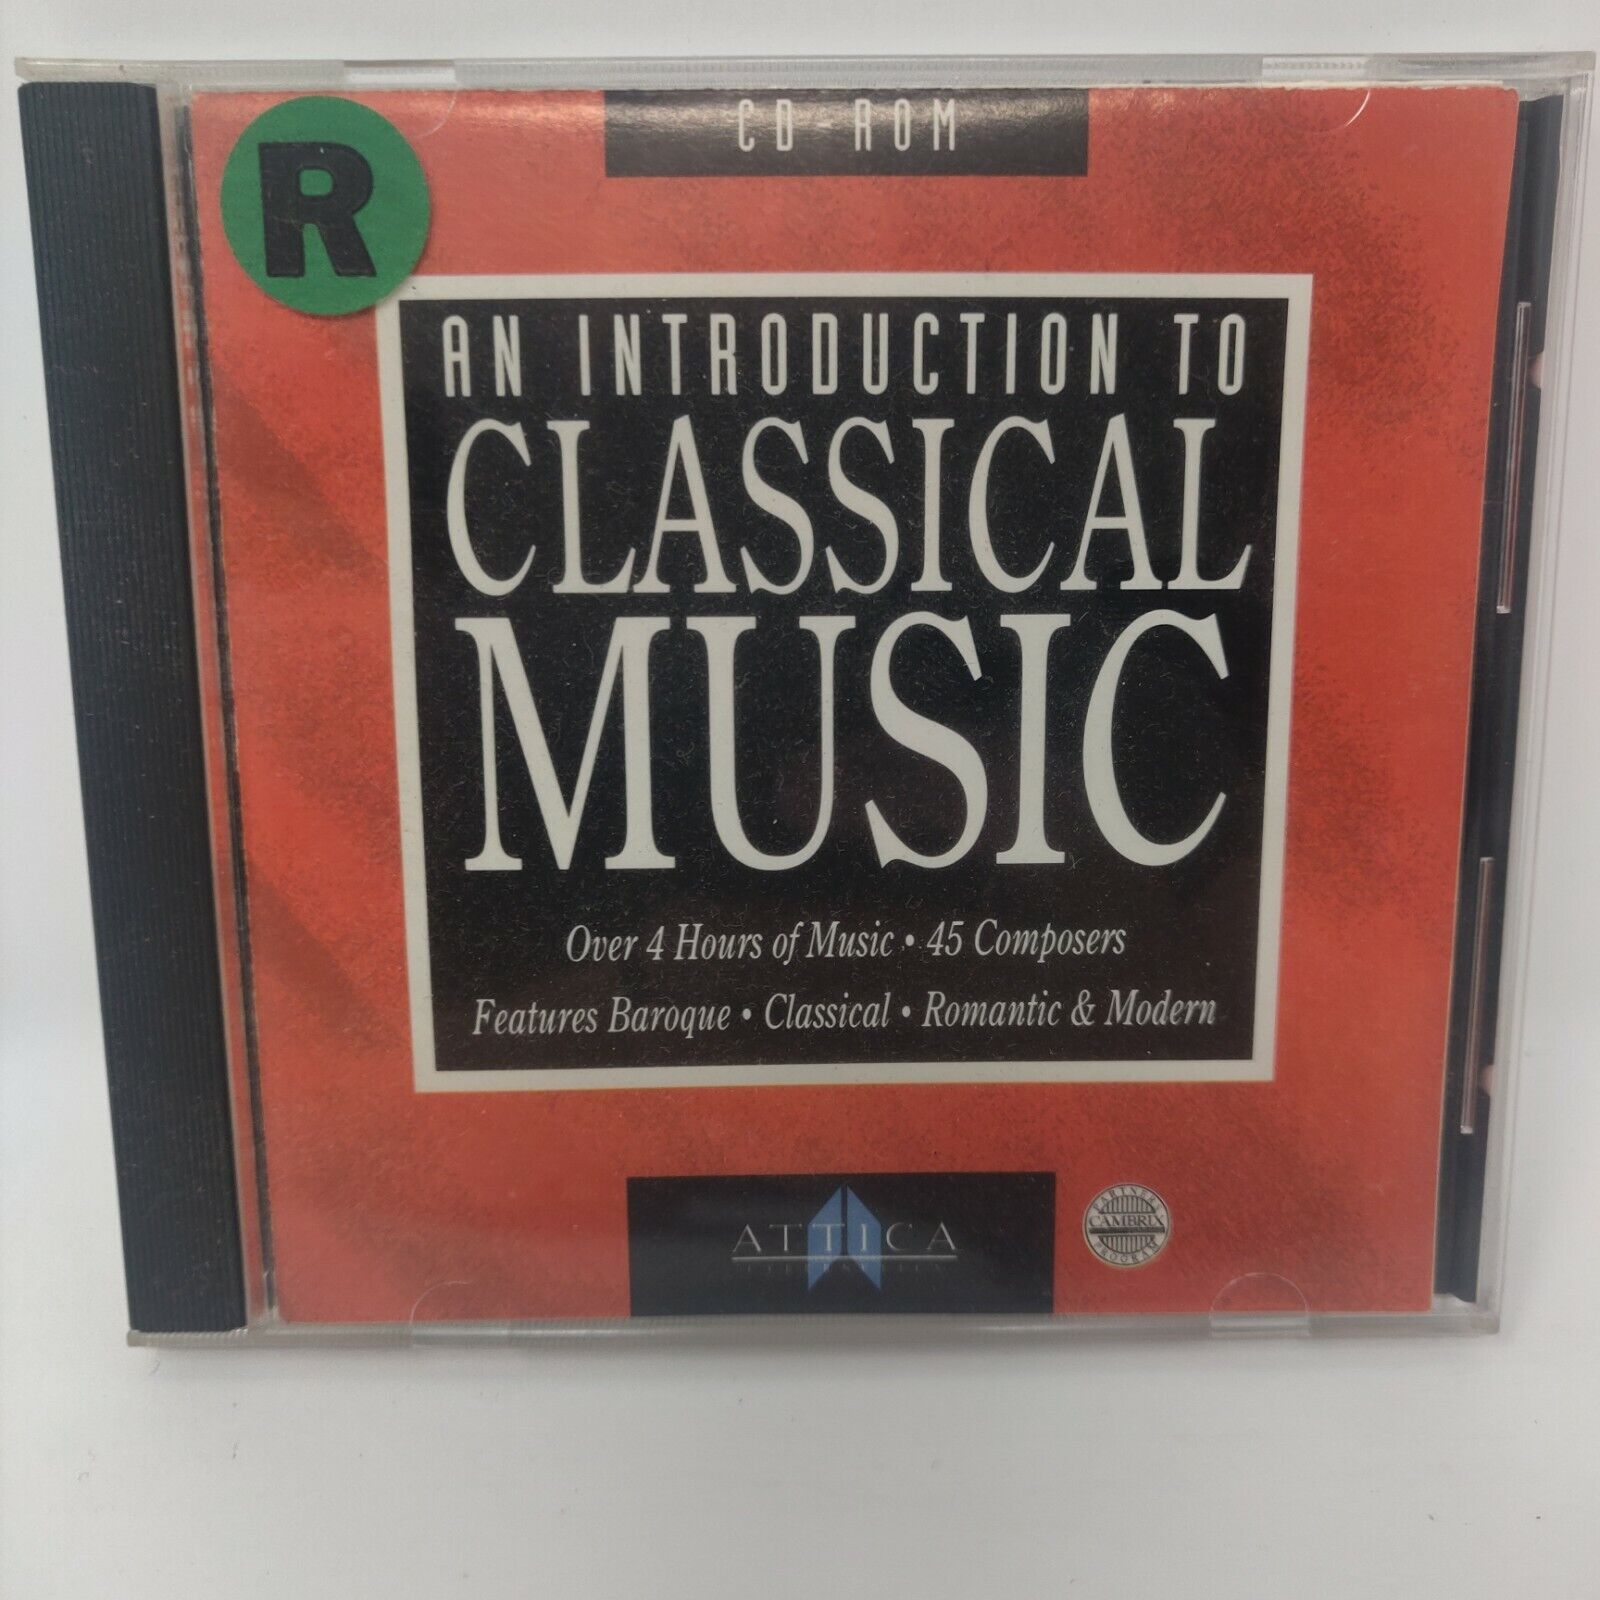 An Introduction to Classical Music CD-ROM Windows CD 4 hours 45 Composers